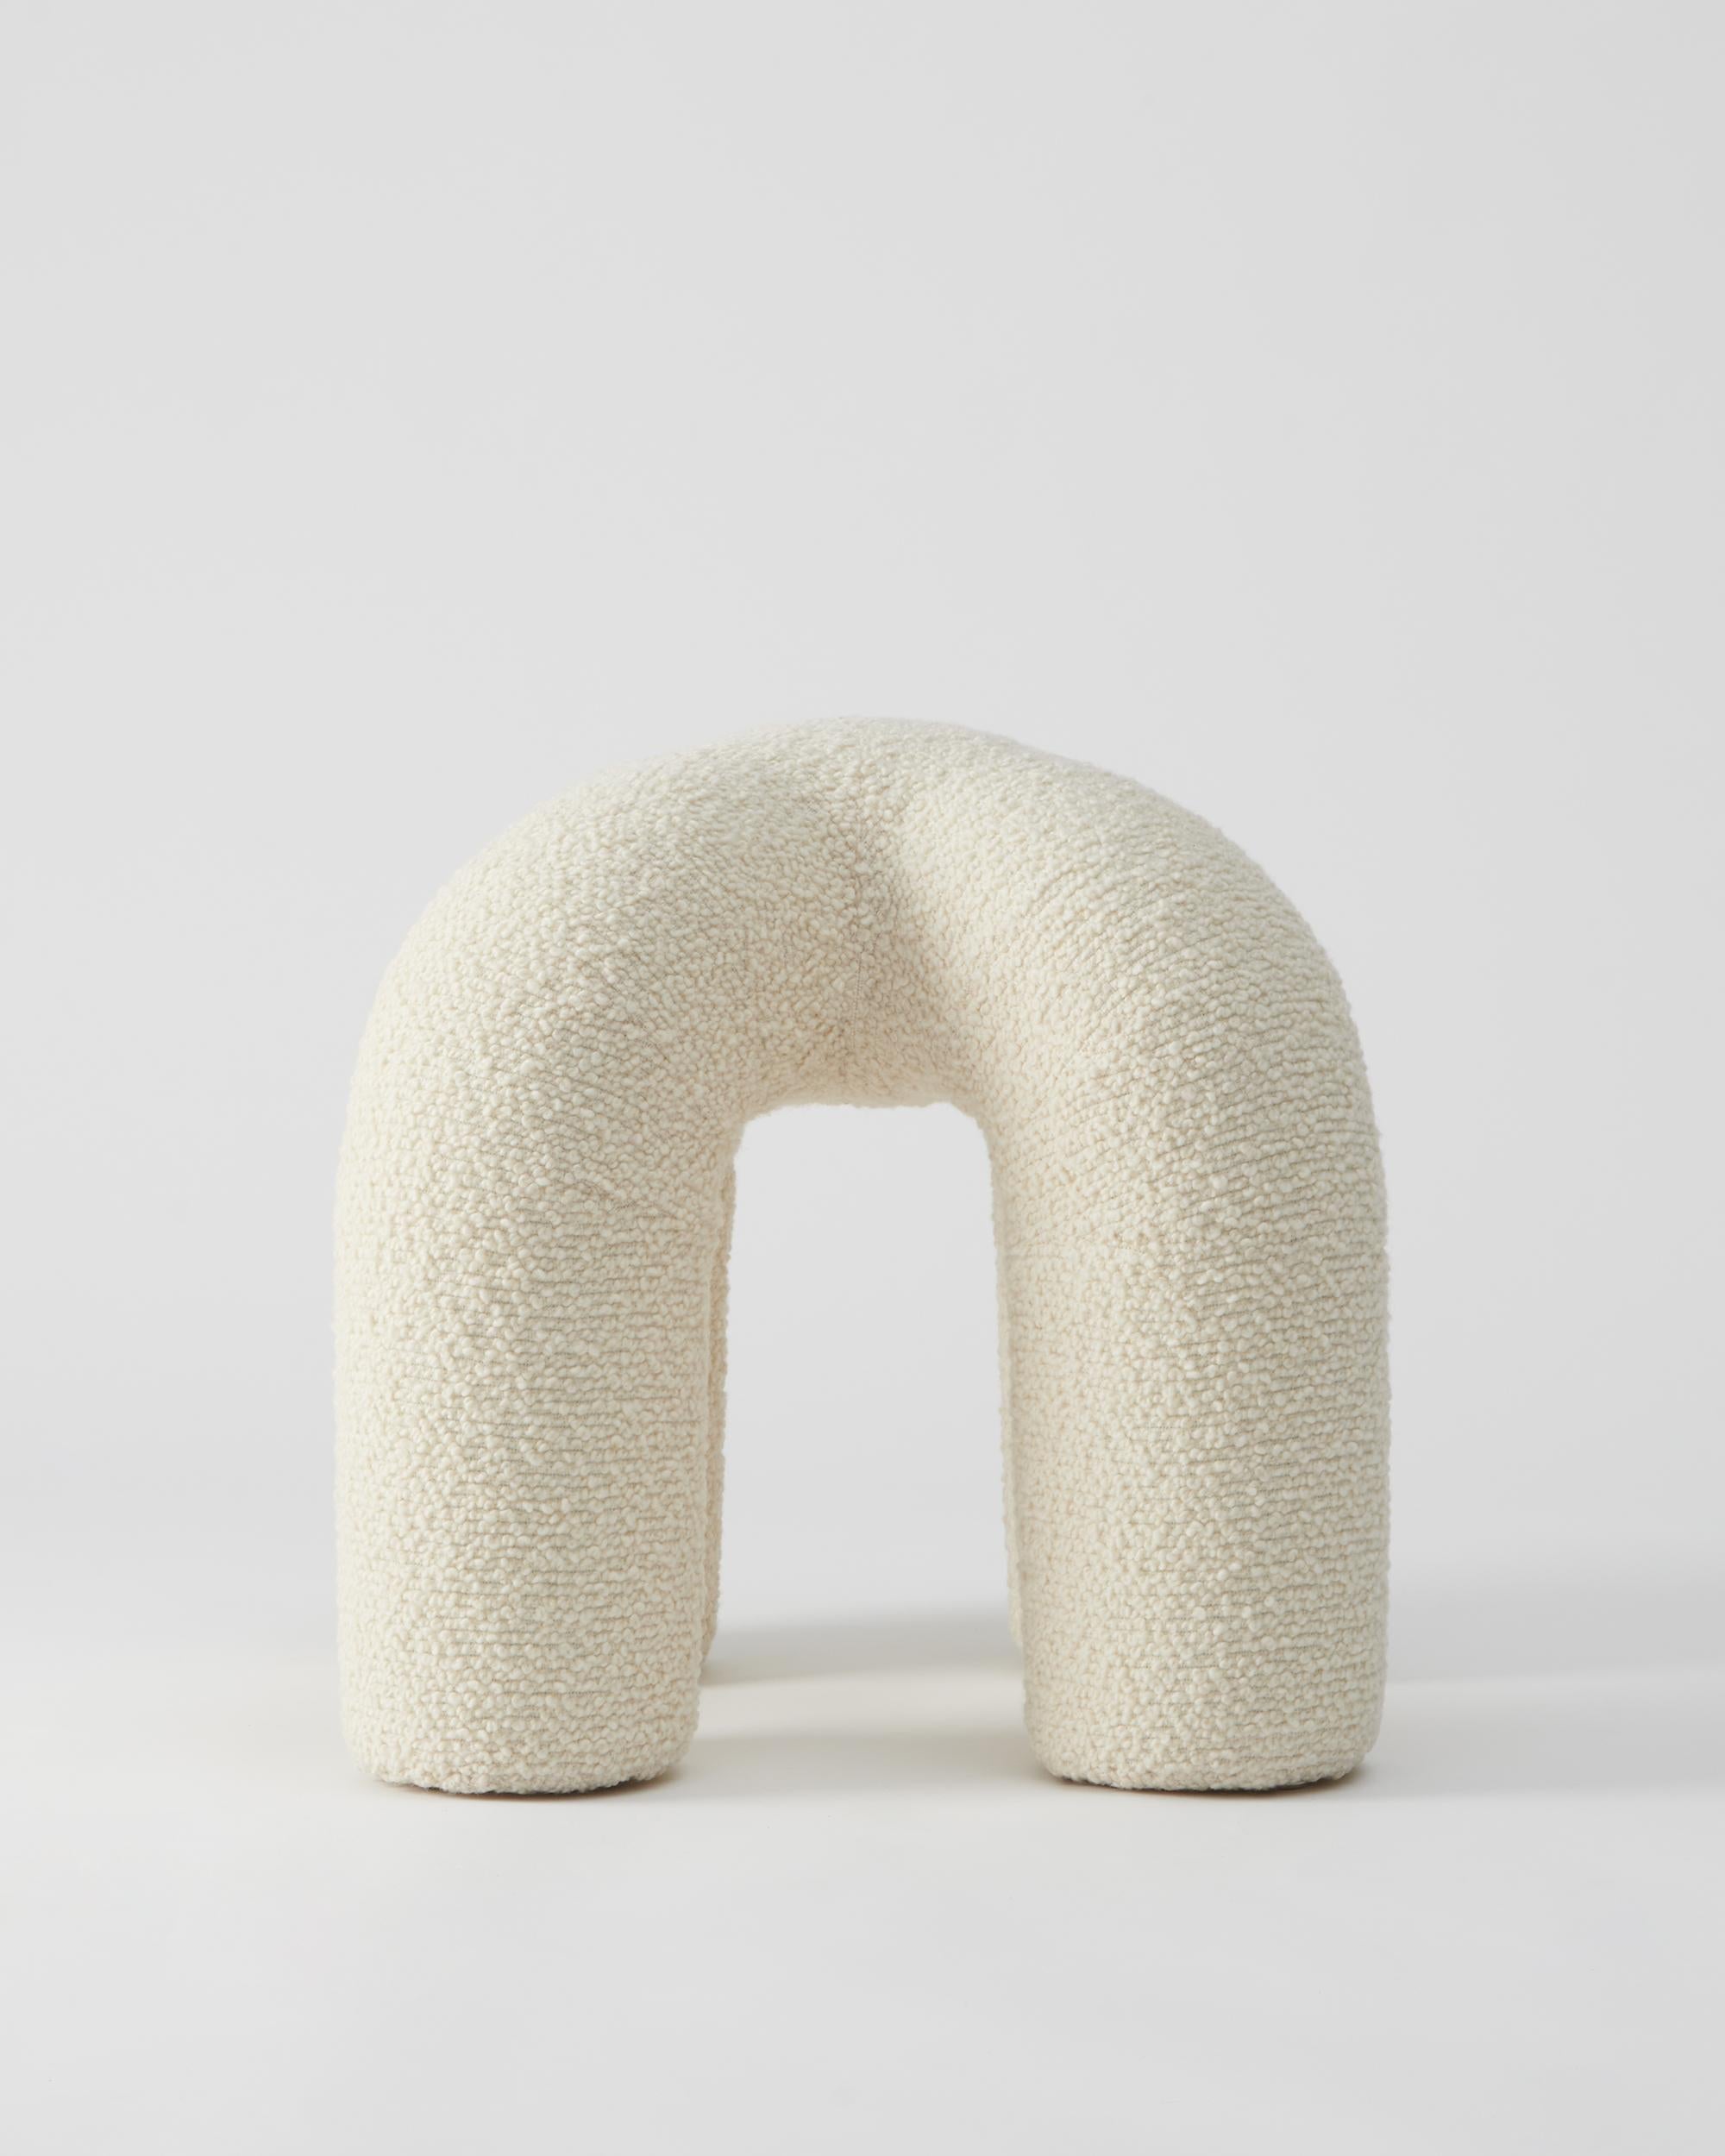 Contemporary Upholstered Stitch Stool For Sale 1